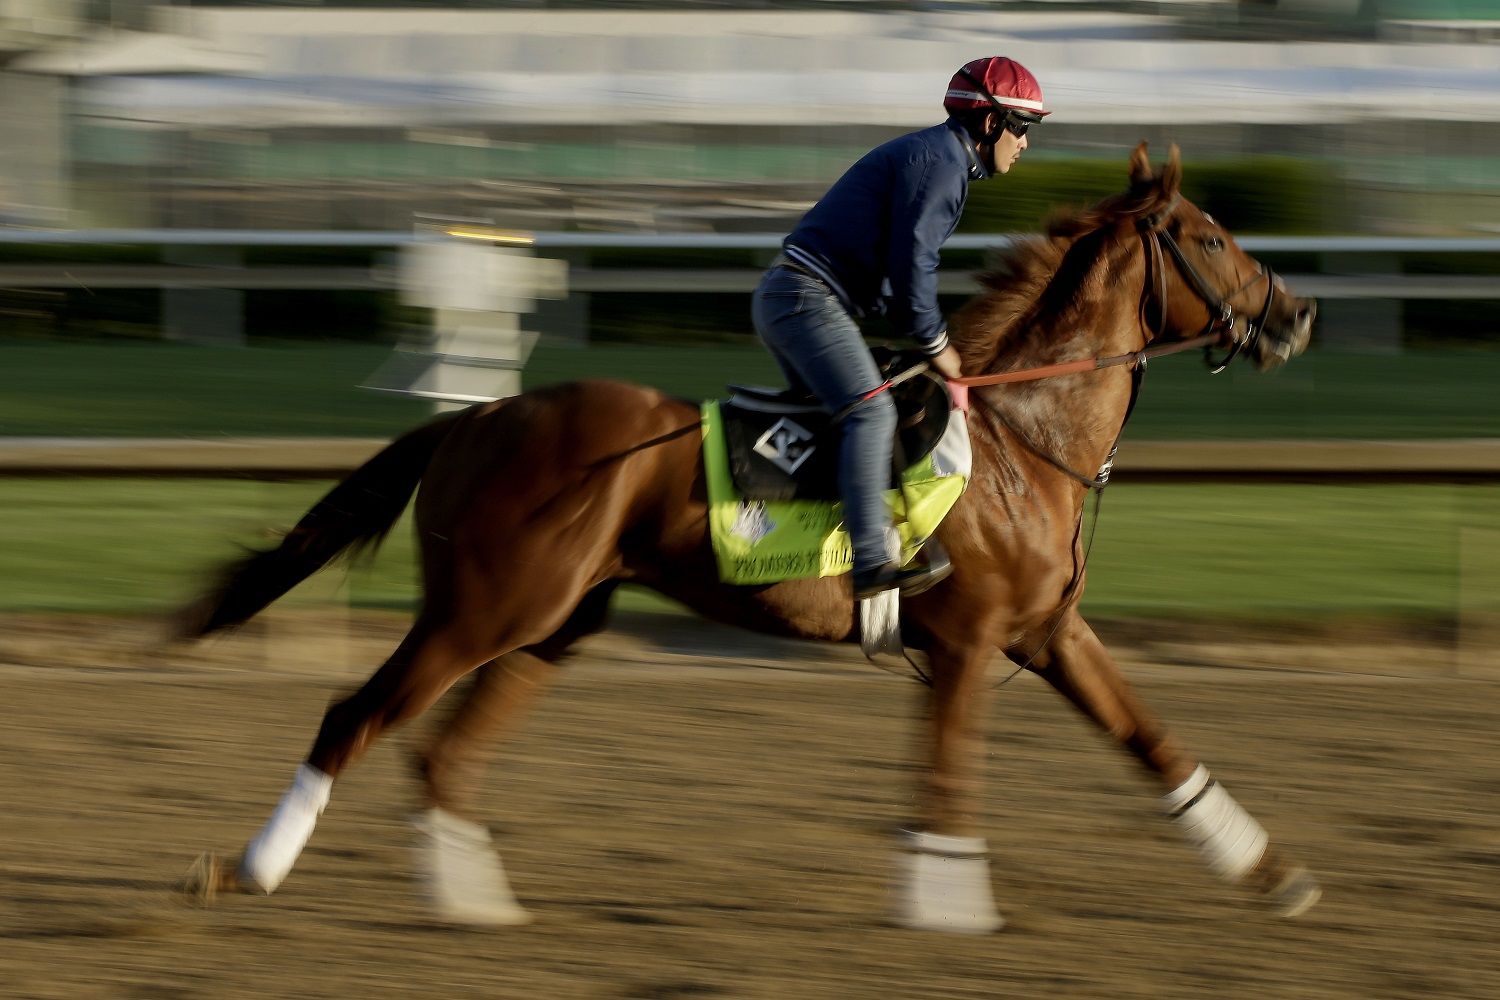 Kentucky Derby hopeful Promises Fulfilled runs during a morning workout at Churchill Downs Tuesday, May 1, 2018, in Louisville, Ky. The 144th running of the Kentucky Derby is scheduled for Saturday, May 5. (AP Photo/Charlie Riedel)